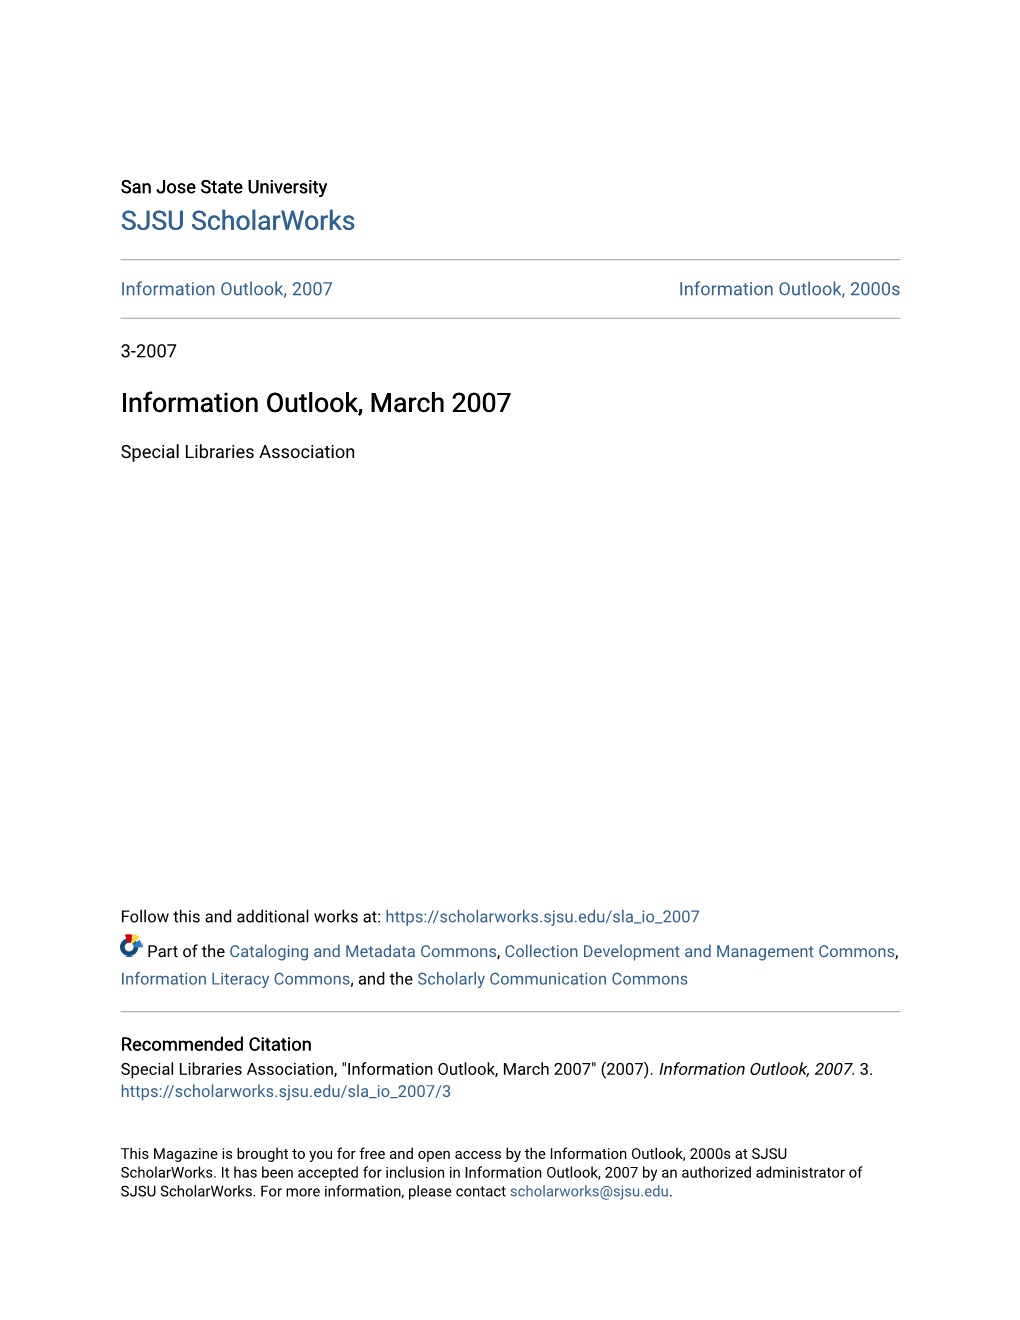 Information Outlook, March 2007